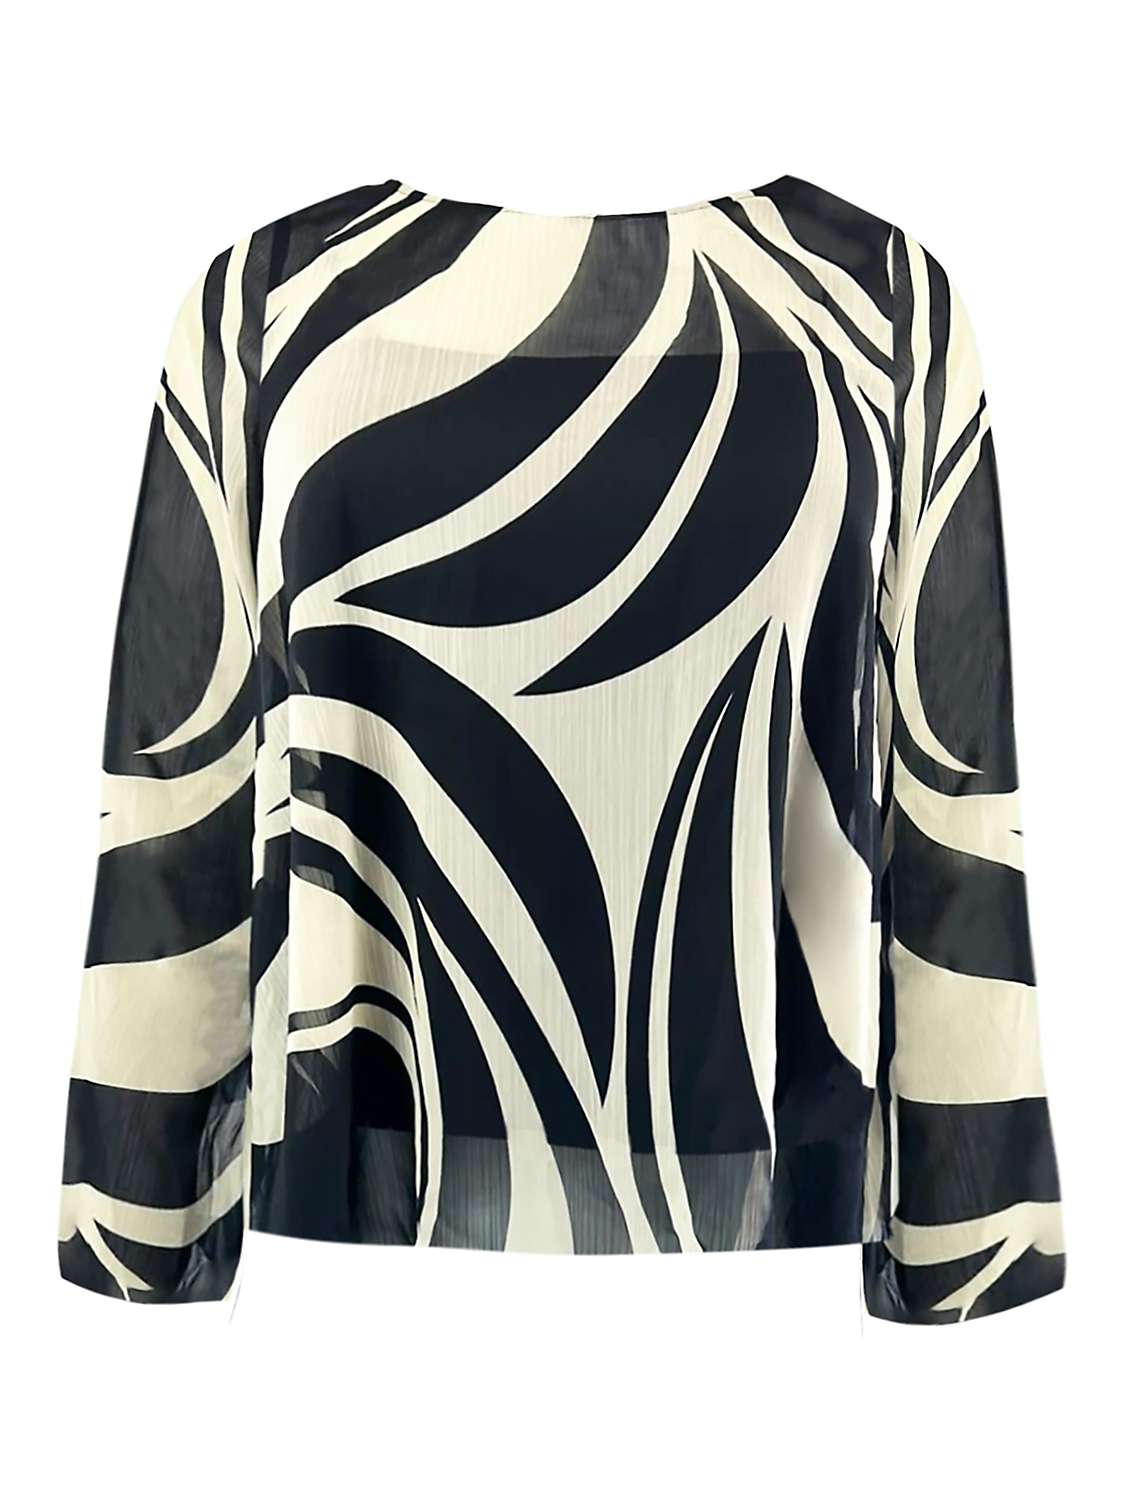 Buy Live Unlimited Curve Mono Swirl Print High Low Chiffon Top, Black Online at johnlewis.com